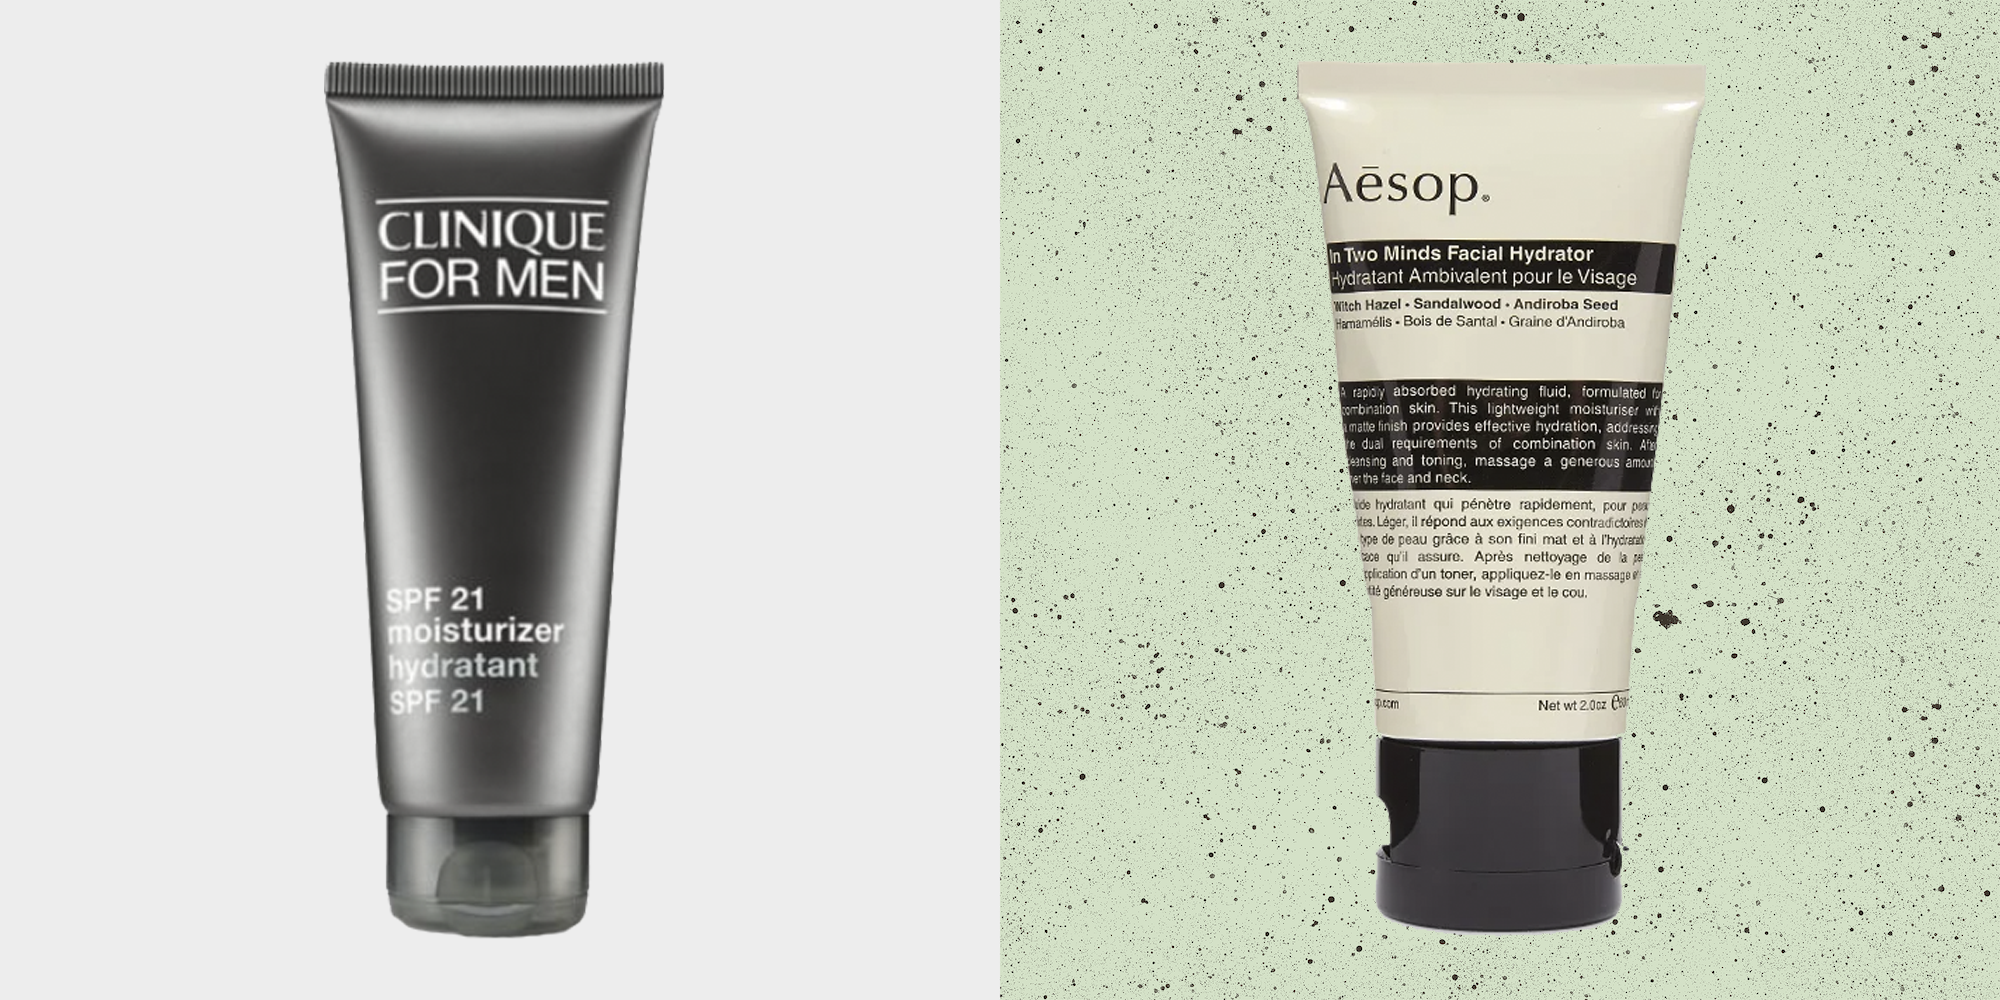 The Best Skincare on Earth, According to the Esquire Editors